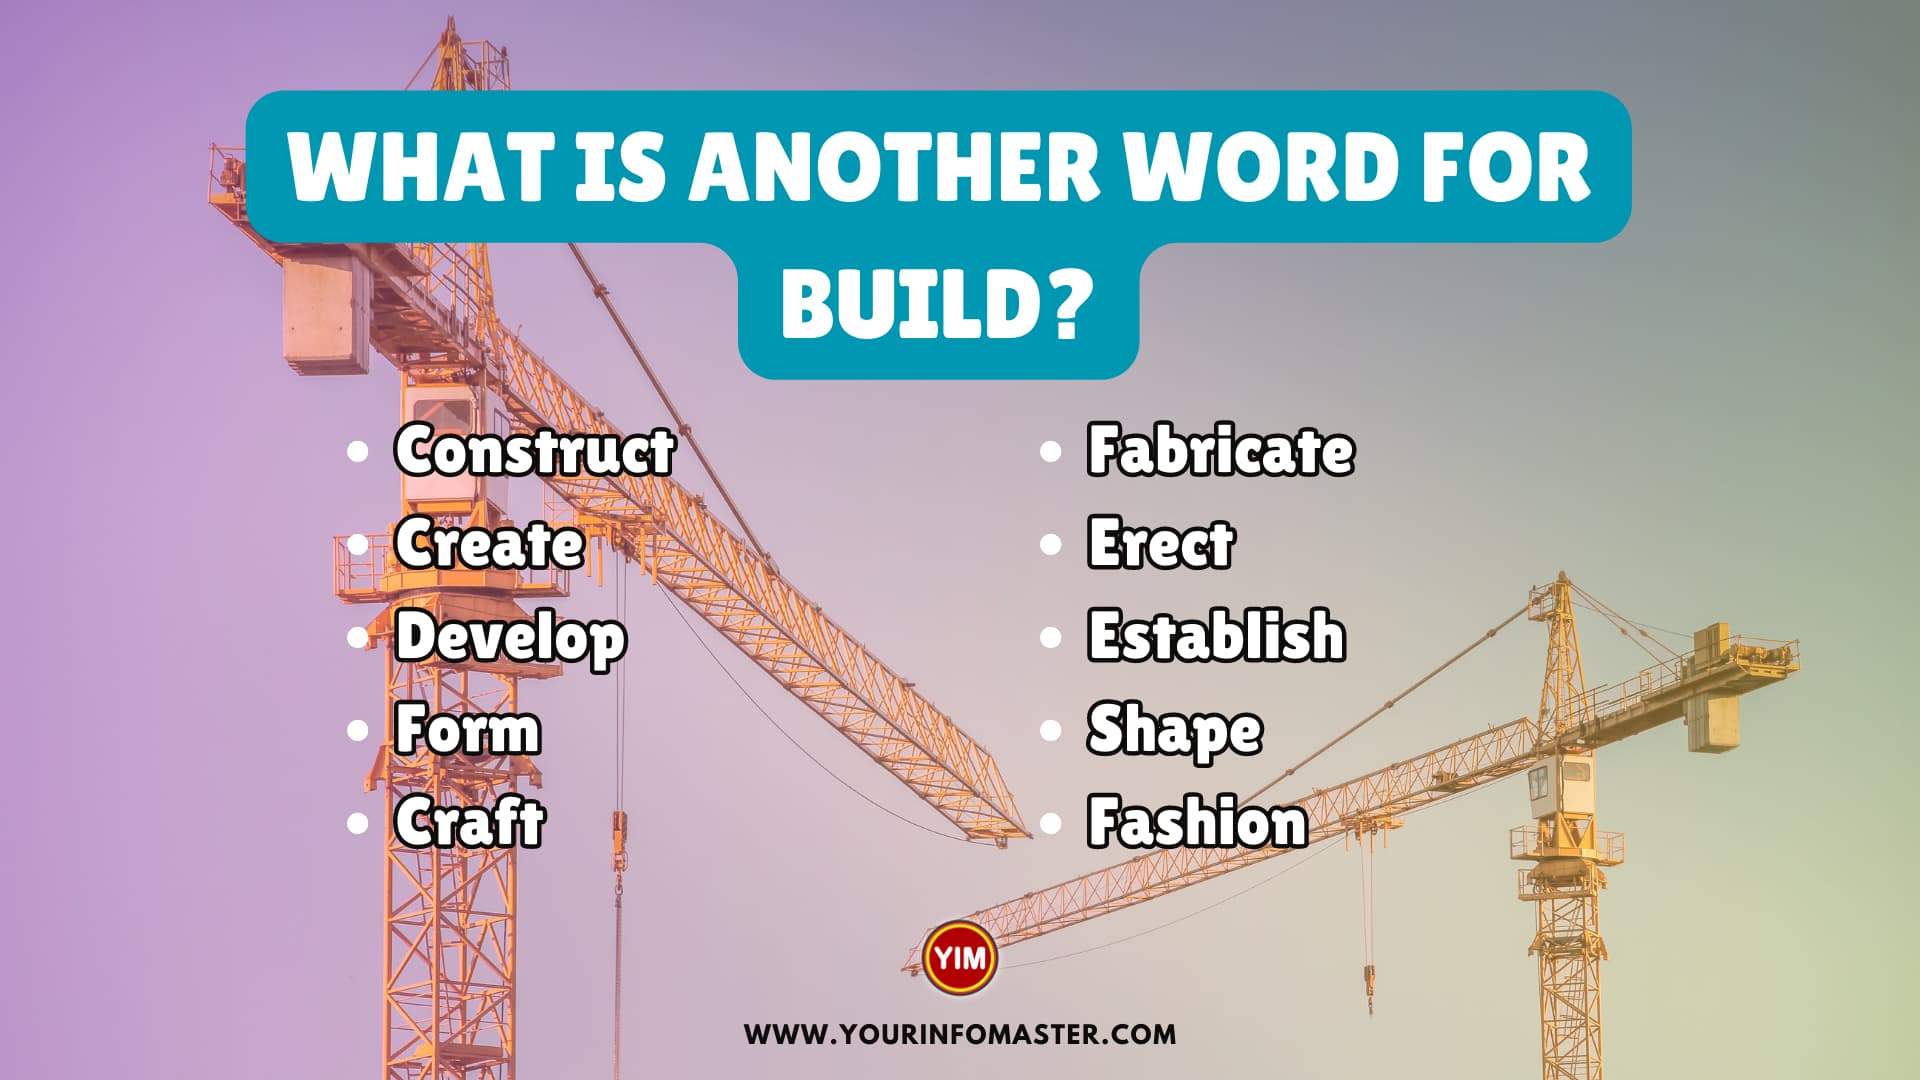 What is another word for Build